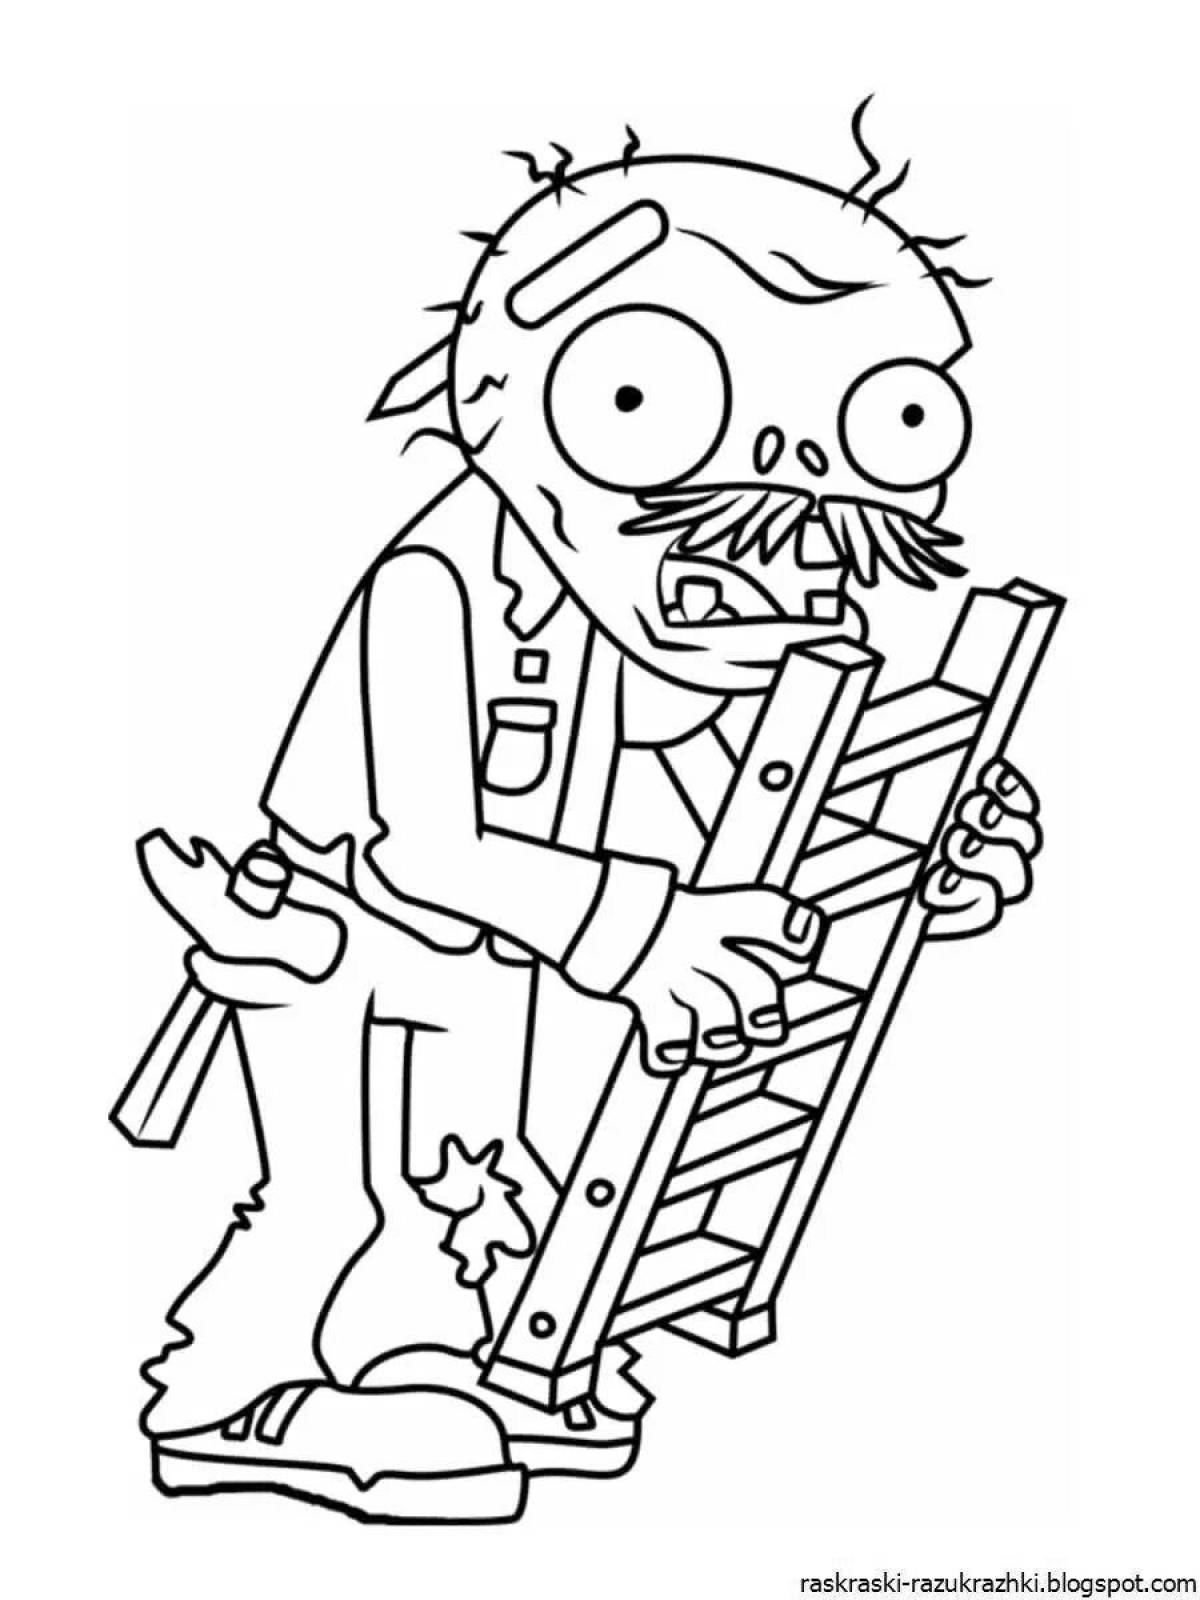 Disgusting zombie coloring book for kids